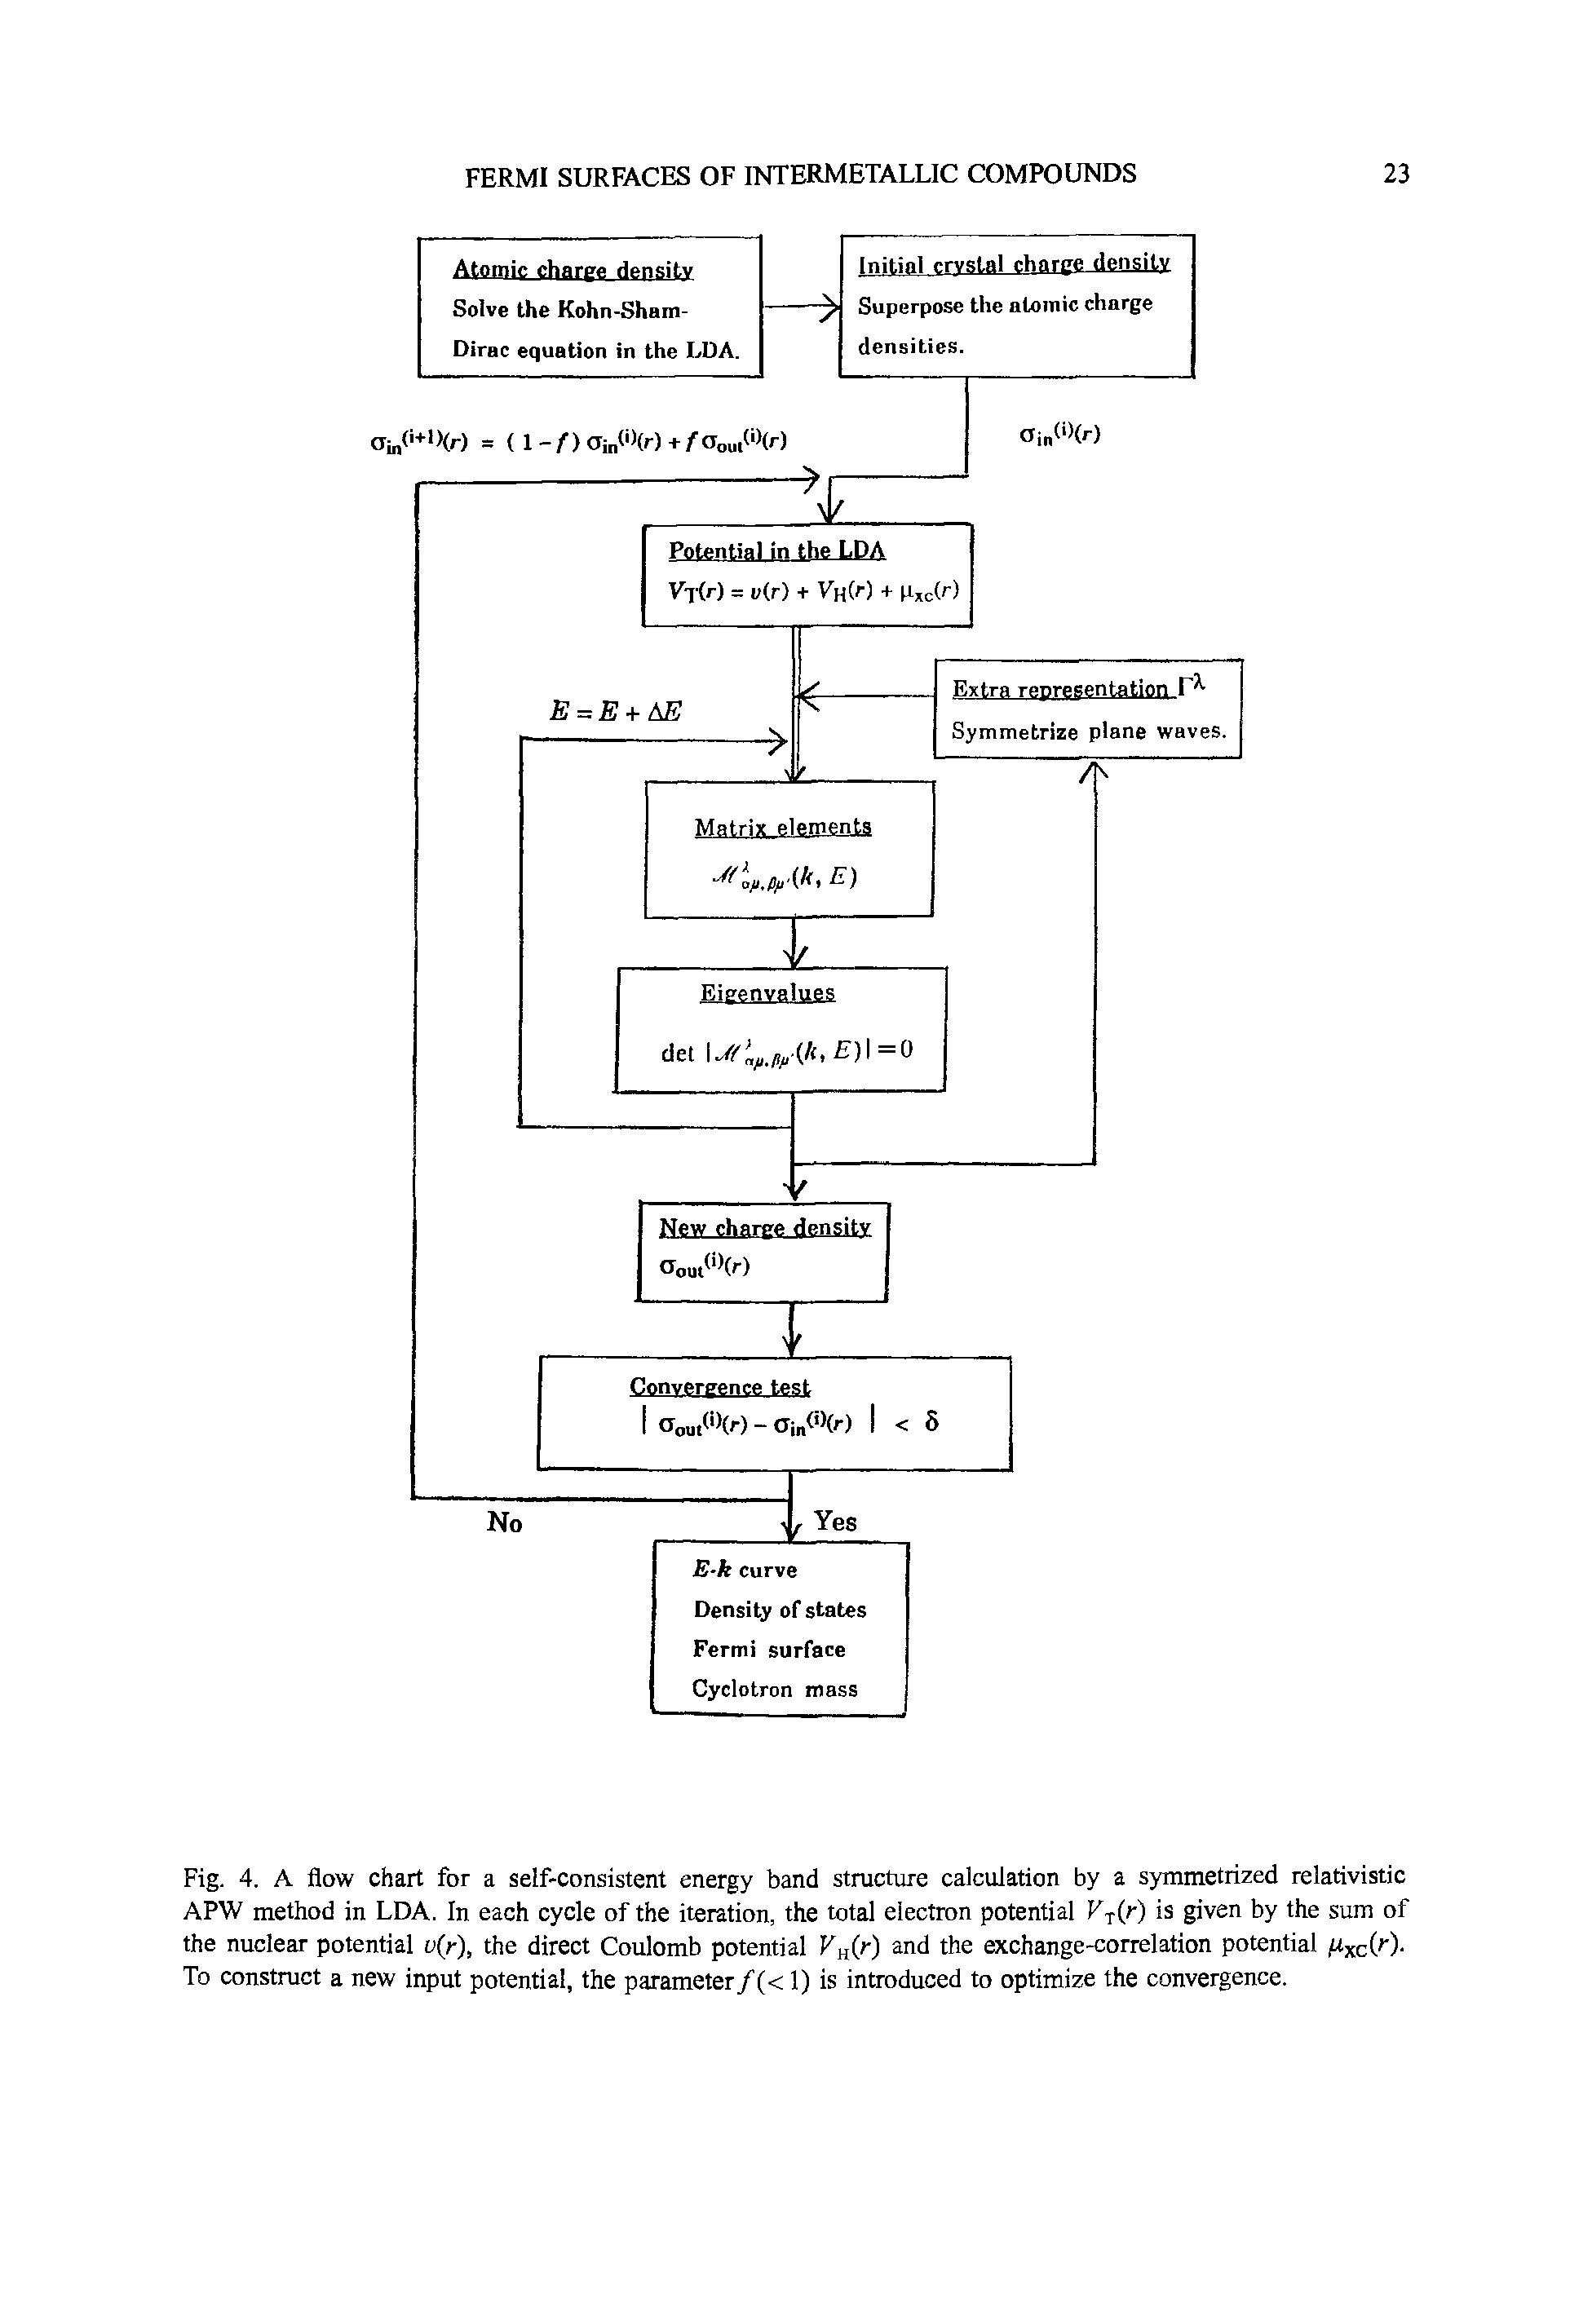 Fig. 4. A flow chart for a self-consistent energy band structure calculation by a symmetrized relativistic APW method in LDA. In each cycle of the iteration, the total electron potential V-r(r) is given by the sum of the nuclear potential v(r), the direct Coulomb potential FhW the exchange-correlation potential / xcW To construct a new input potential, the parMneter/(< 1) is introduced to optimize the convergence.